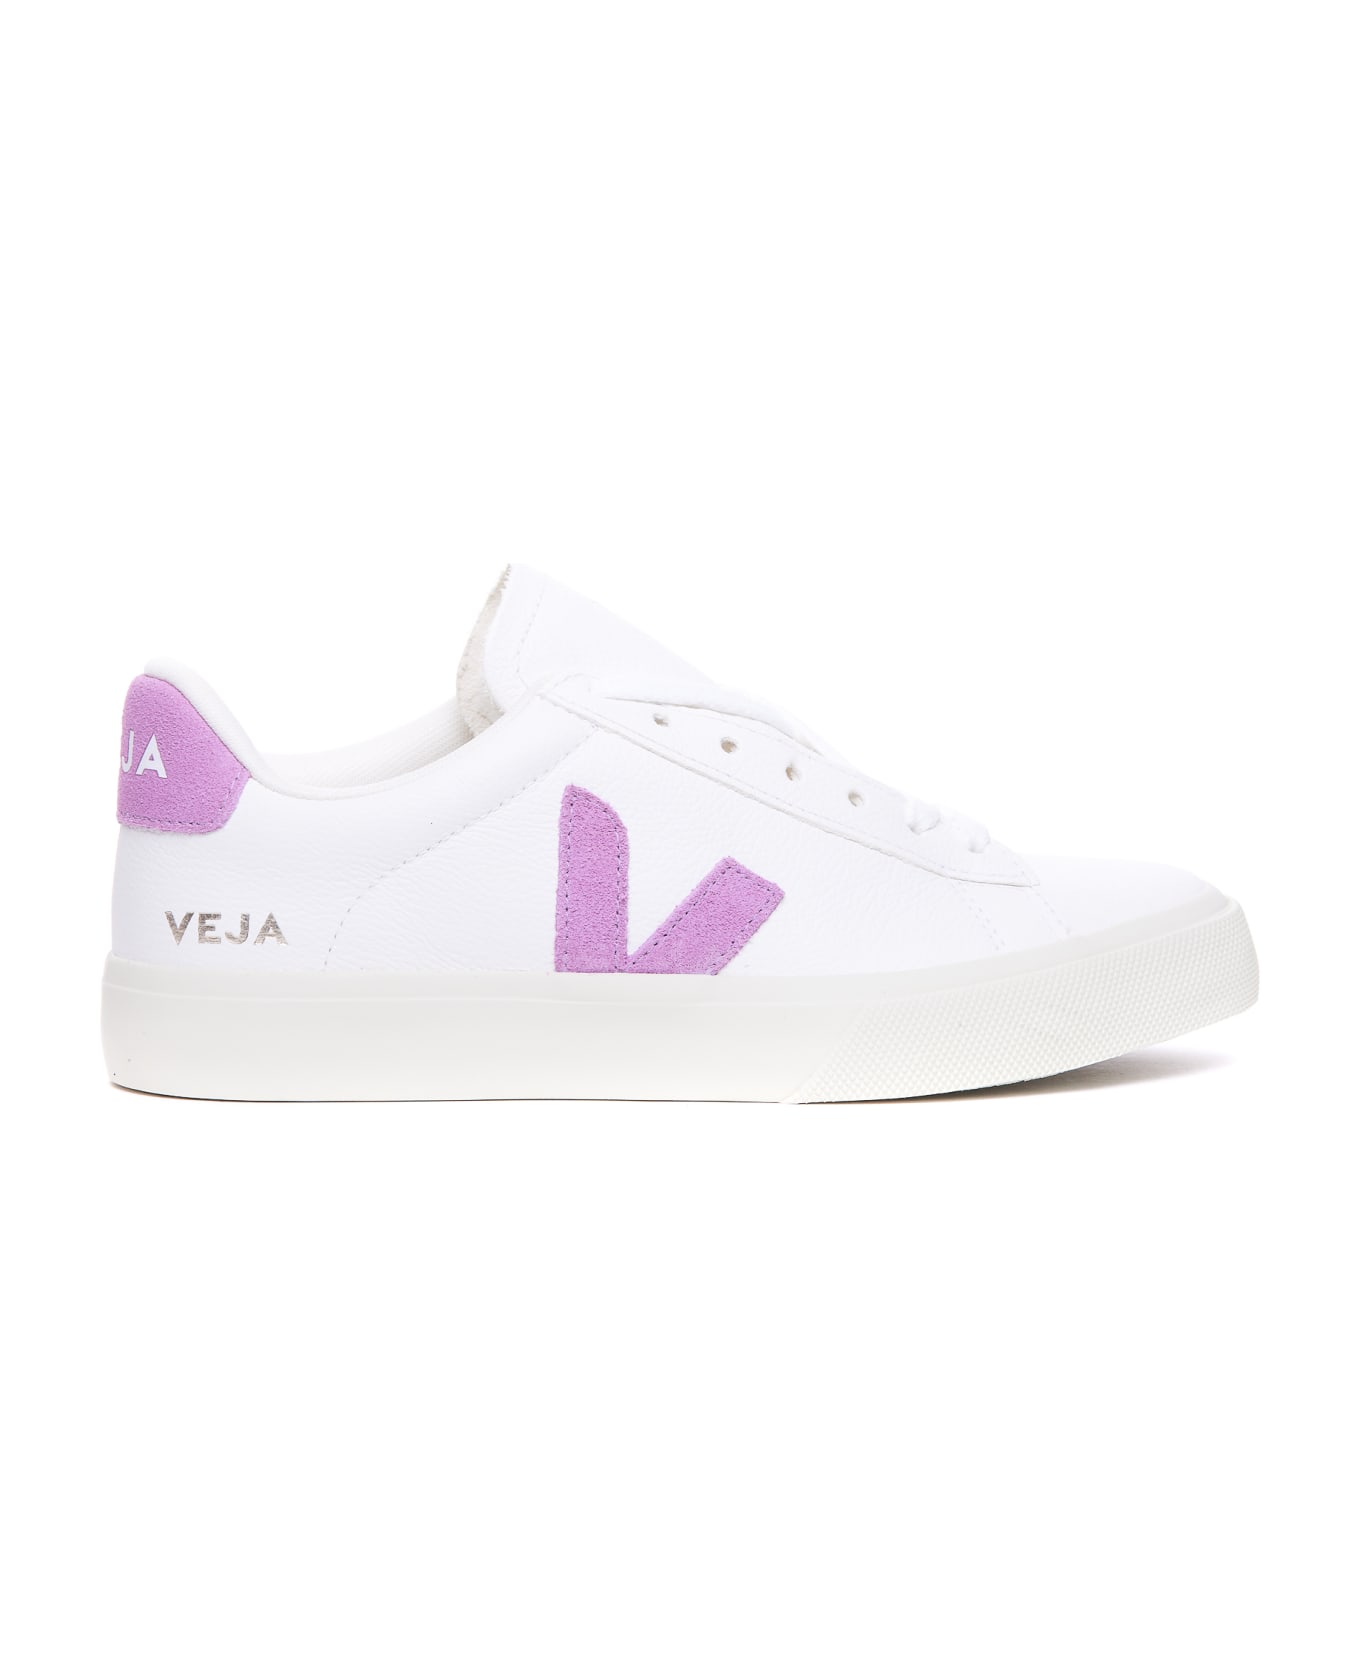 Veja Campo Sneakers - White スニーカー